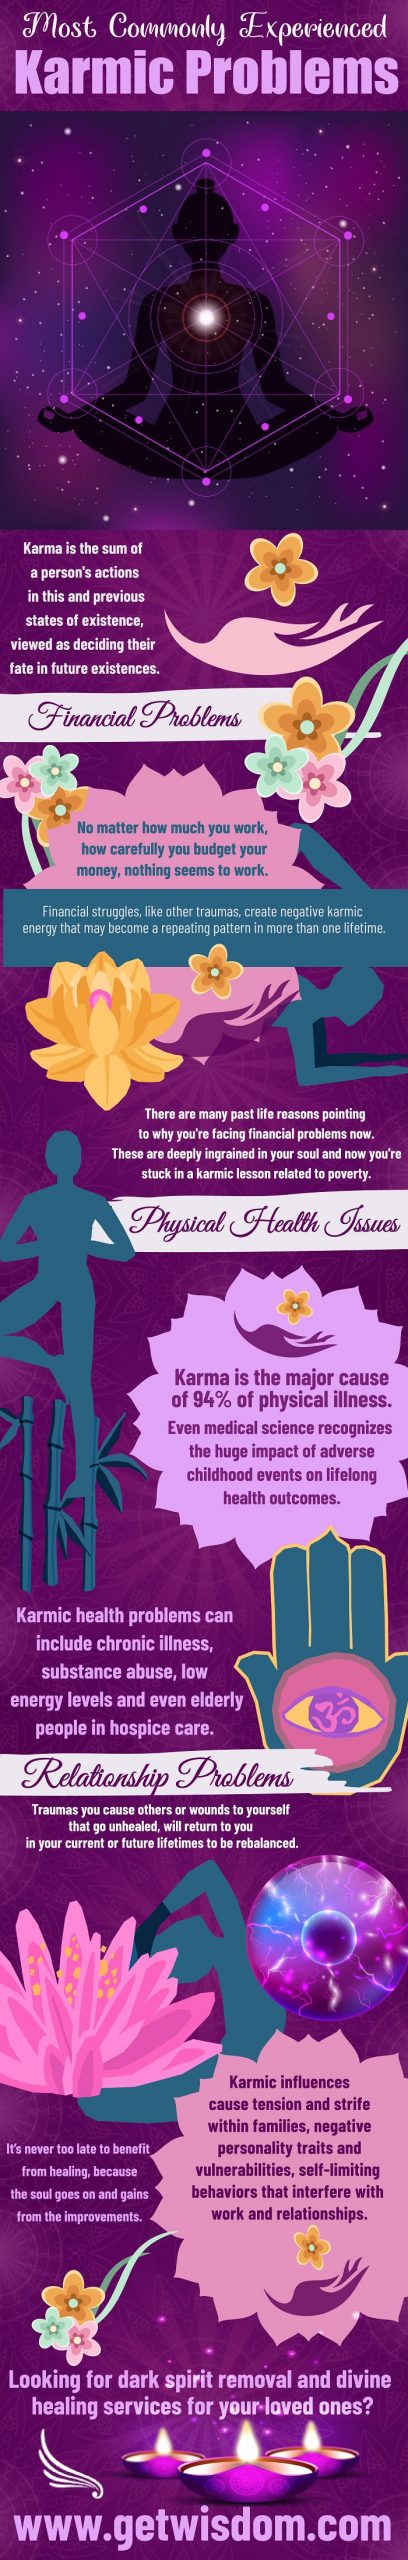 Most Commonly Experienced Karmic Problems